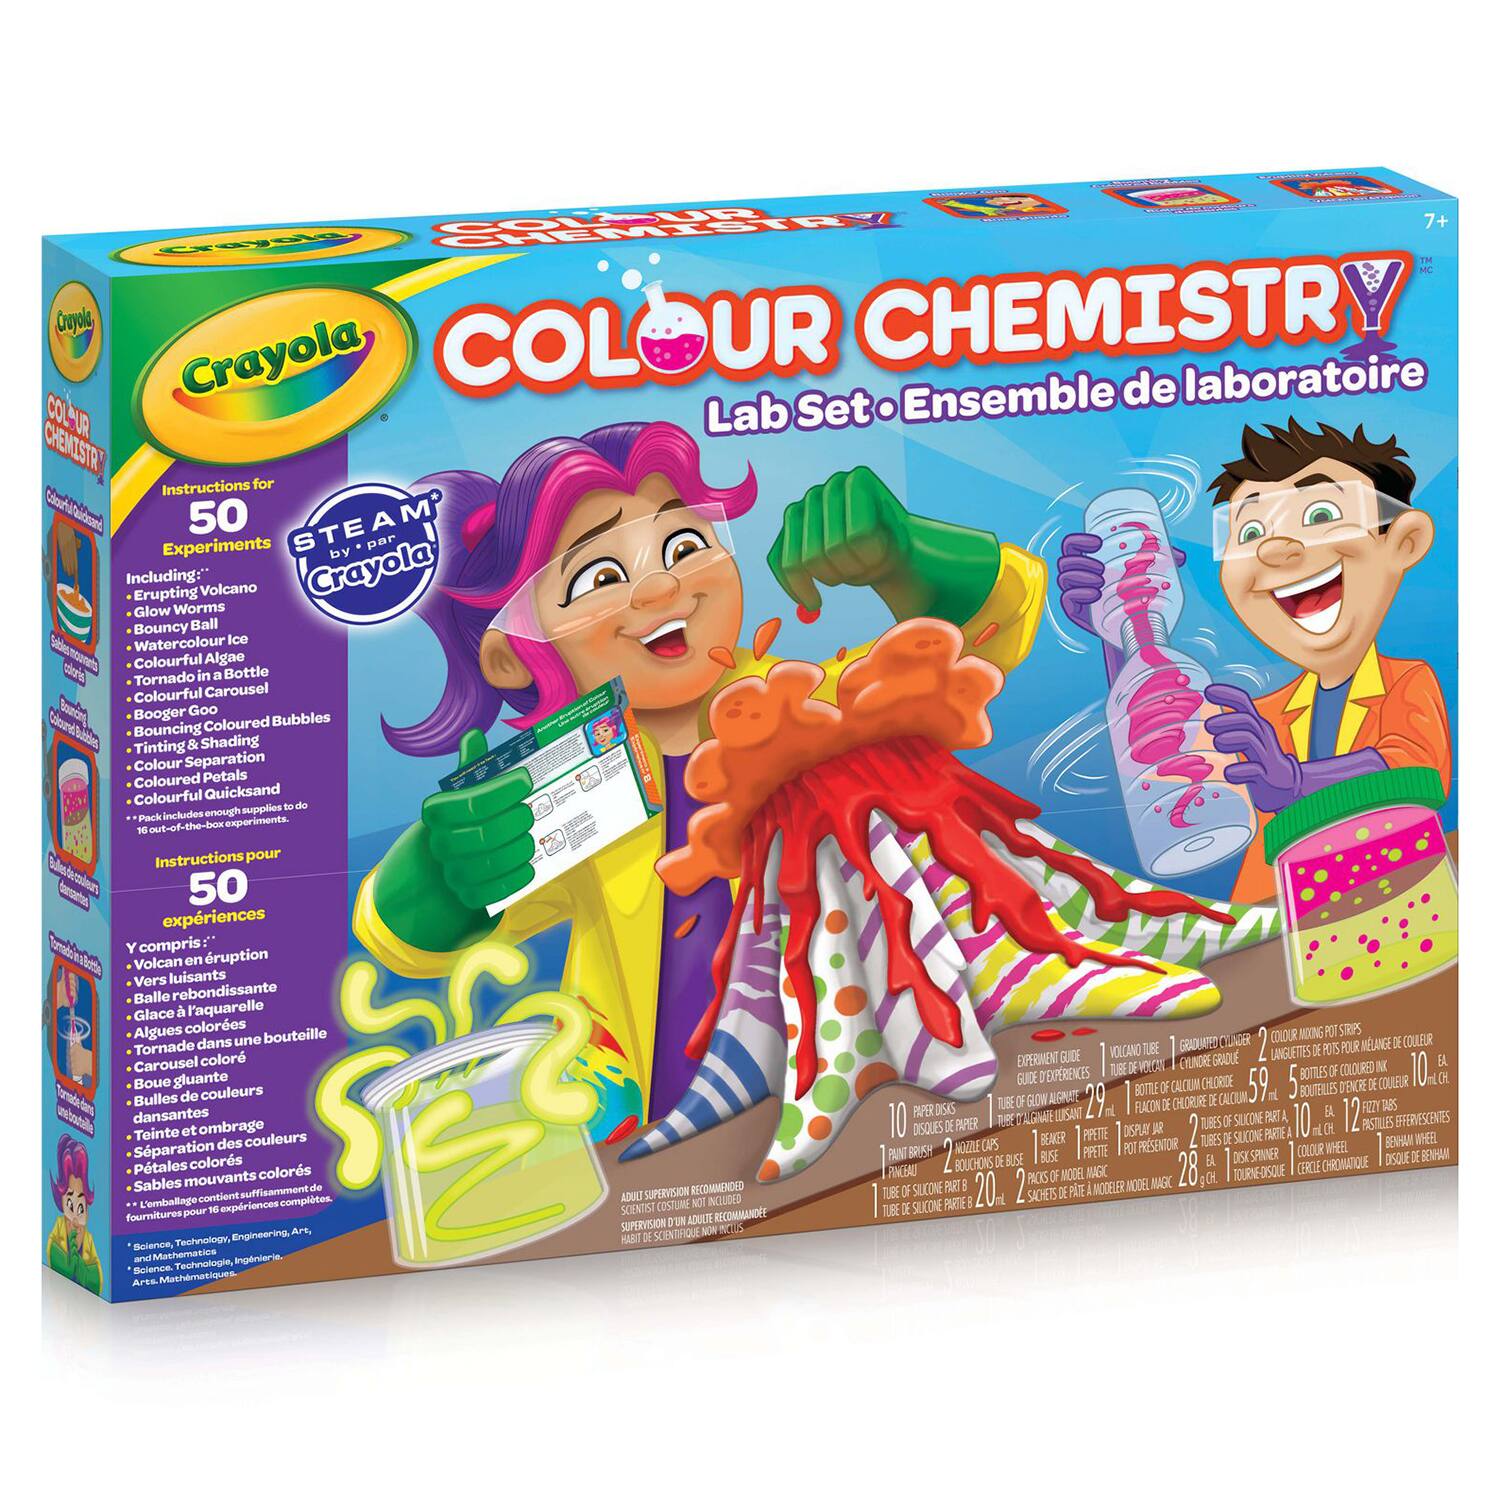 National Geographic™ Science Magic Kit